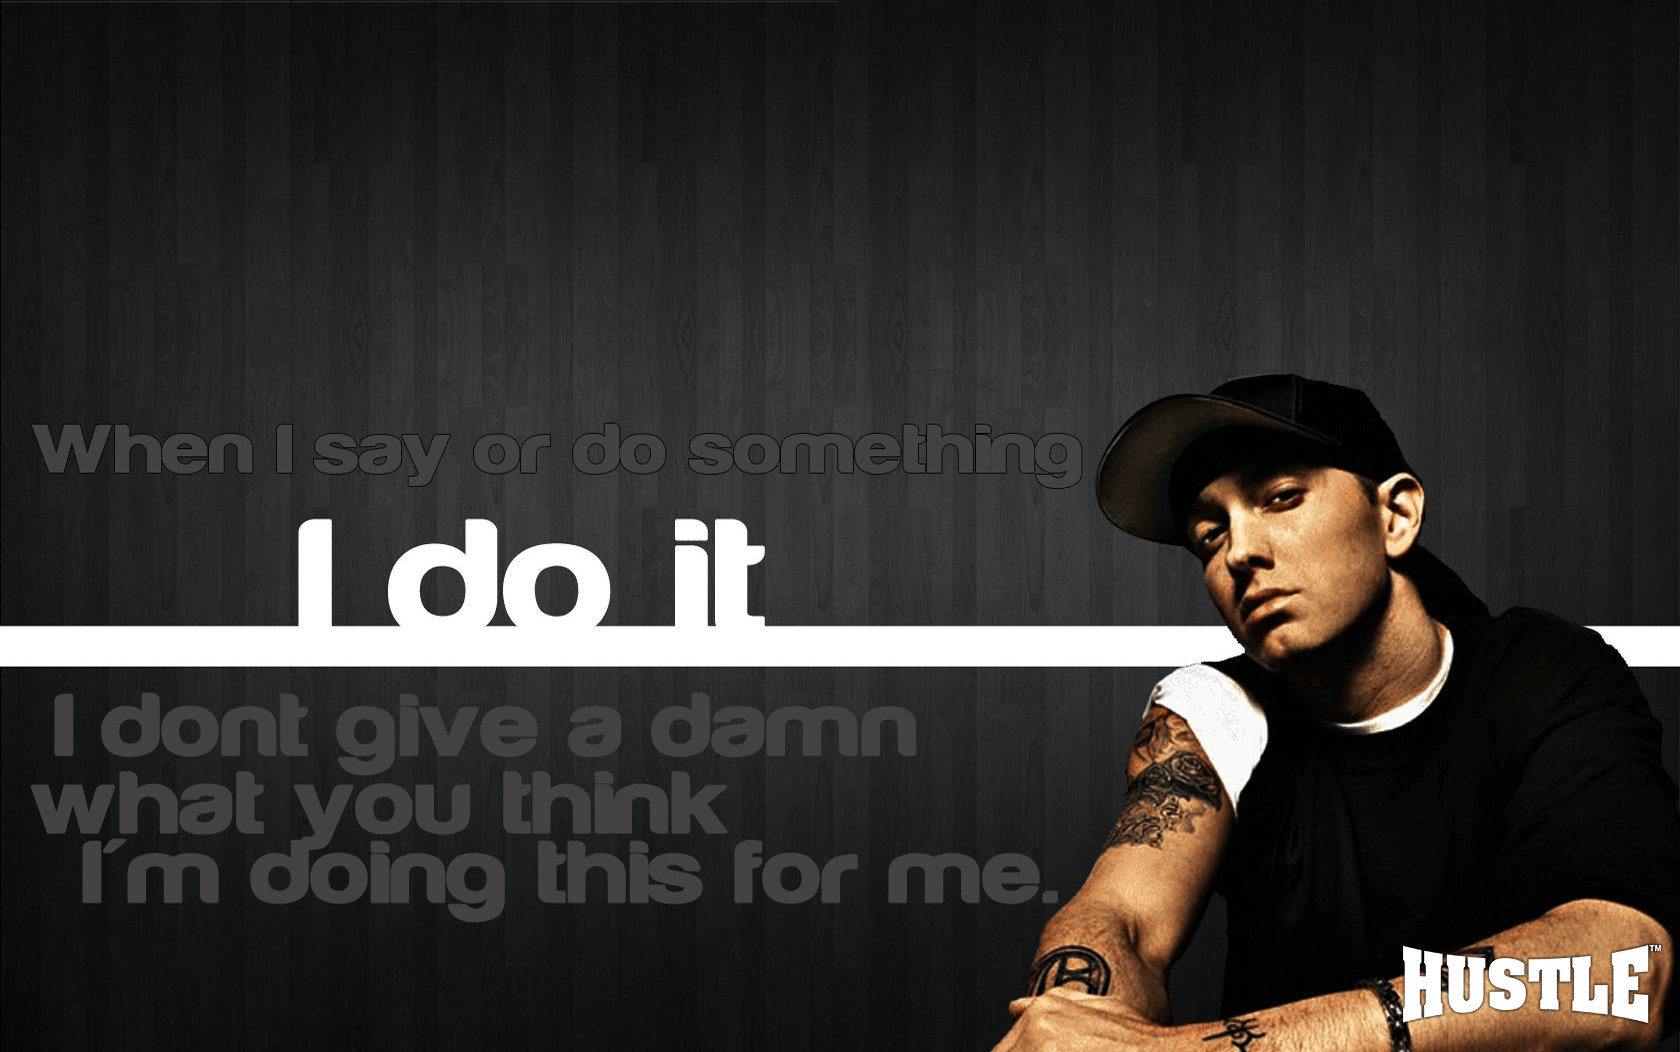 Eminem Wallpaper With Quotes